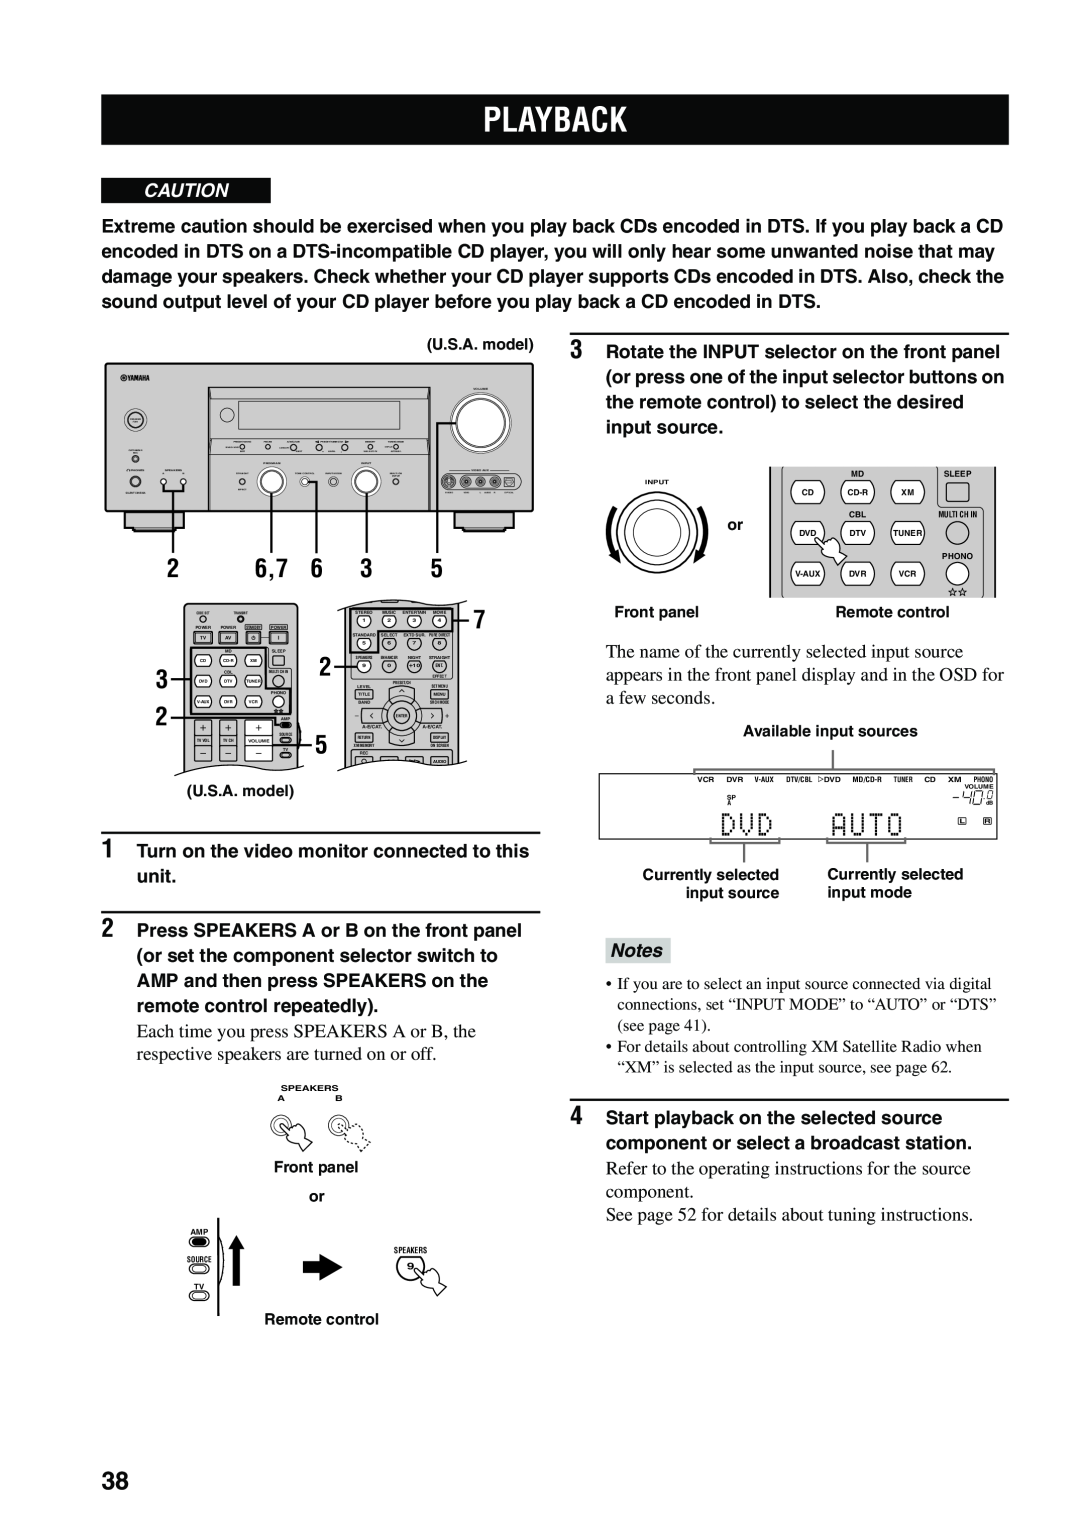 Yamaha HTR-5960 owner manual Playback, Auto, 1Turn on the video monitor connected to this unit, Notes 